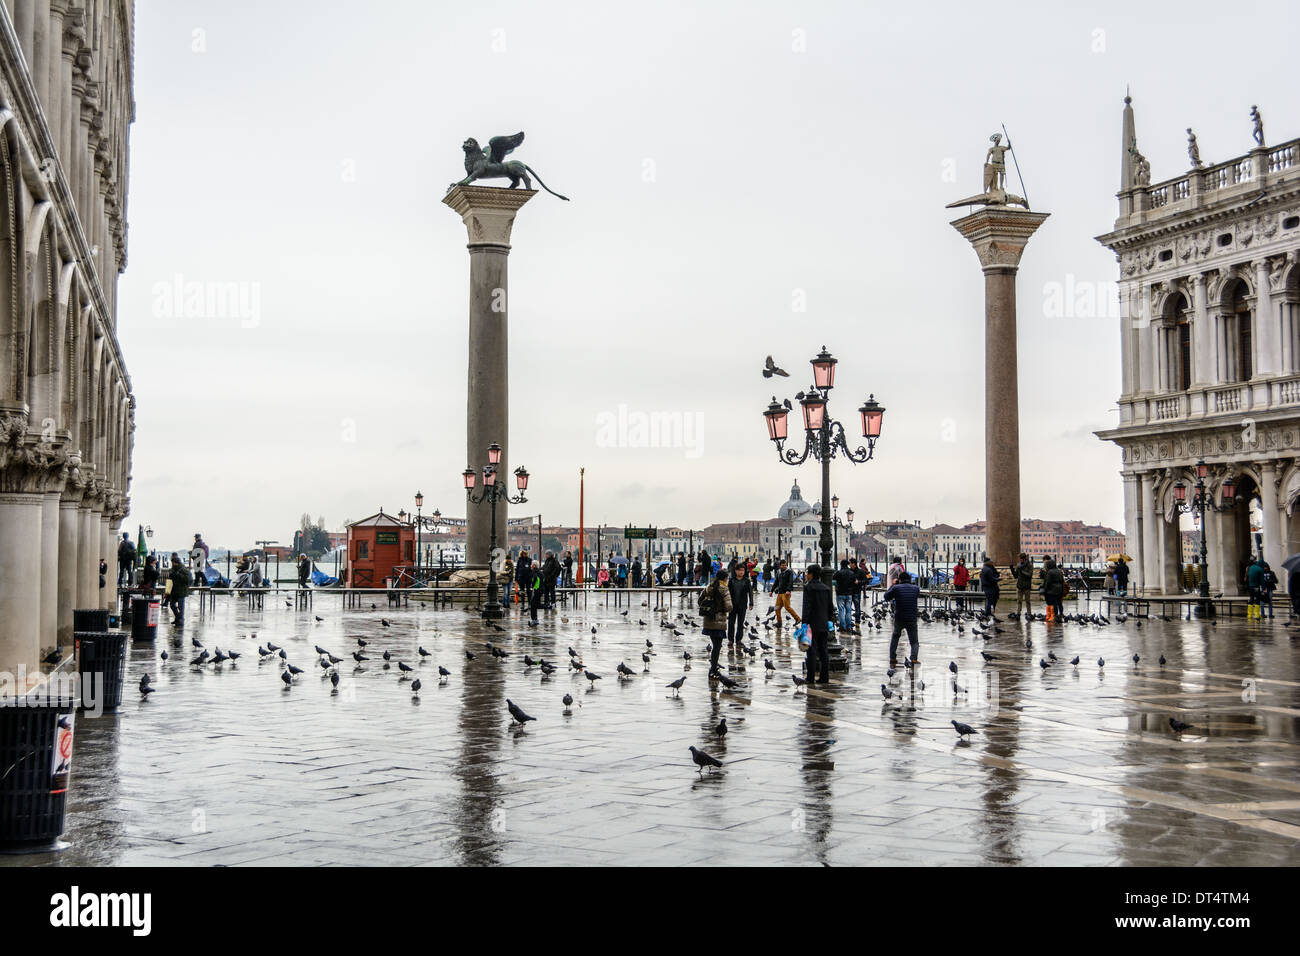 Venice, Italy. View over the Piazzetta di San Marco with two columns and tourists in rainwear feeding pigeons on a rainy day. Stock Photo